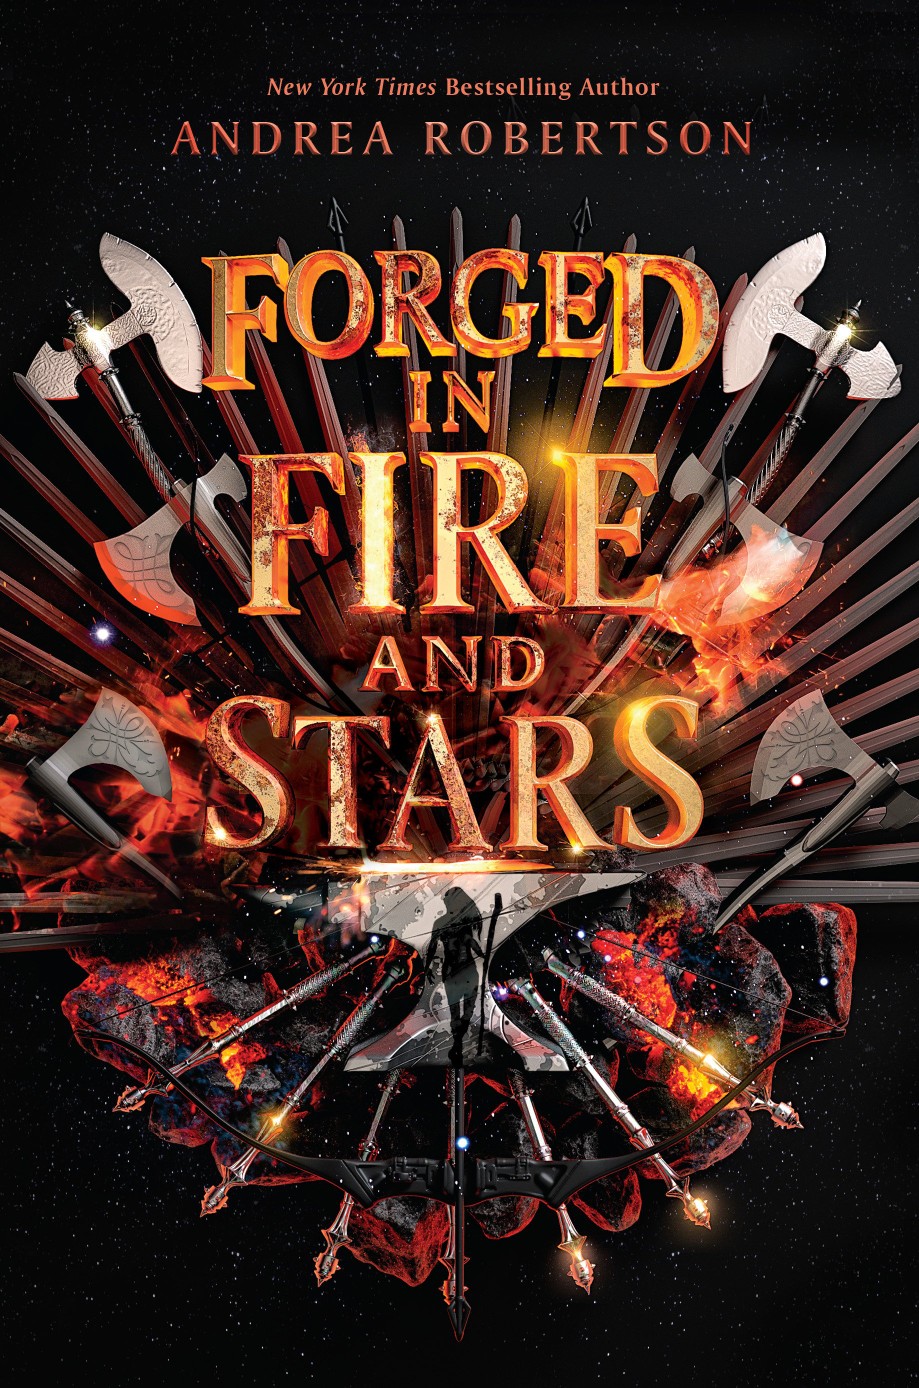 Forged In Fire And Stars Release Date? 2020 YA Fantasy Book Releases